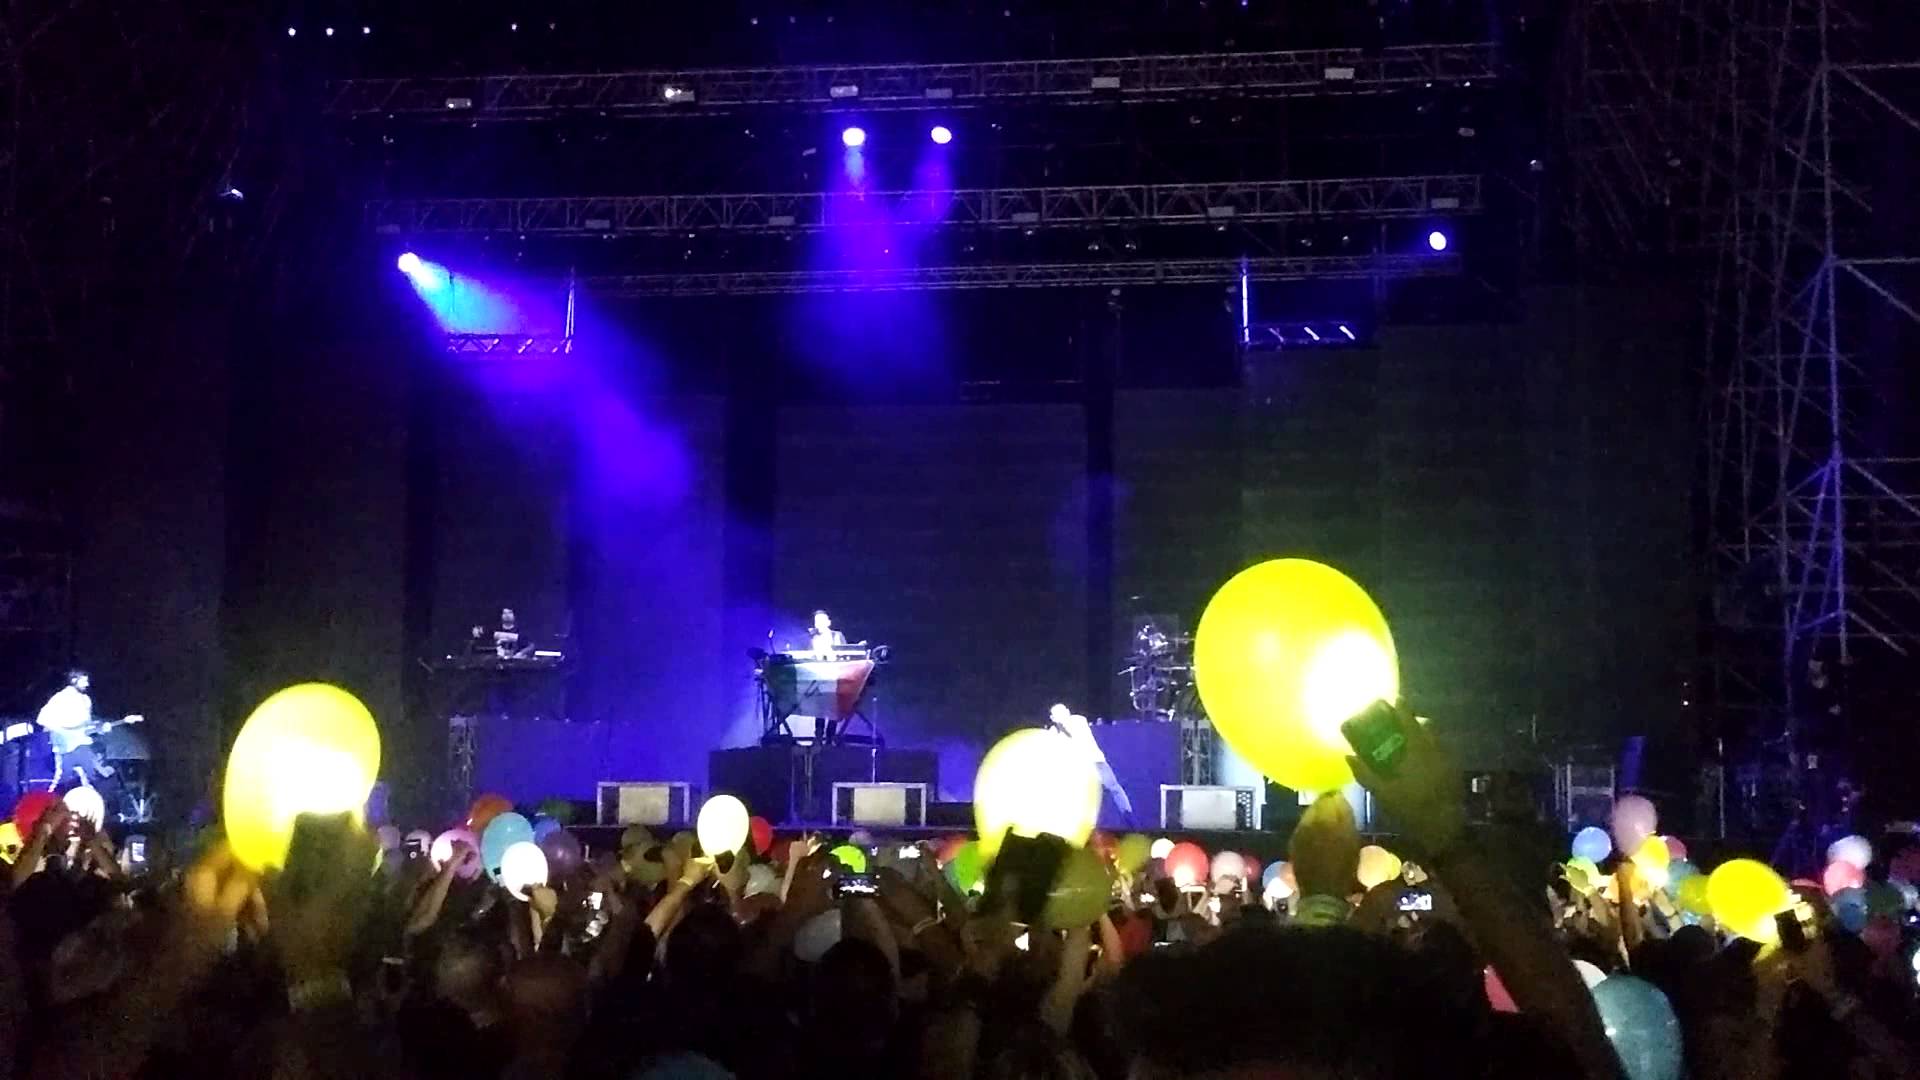 Final Masquerade - Linkin Park (Rock in Roma 2015) - Flash mob with balloons